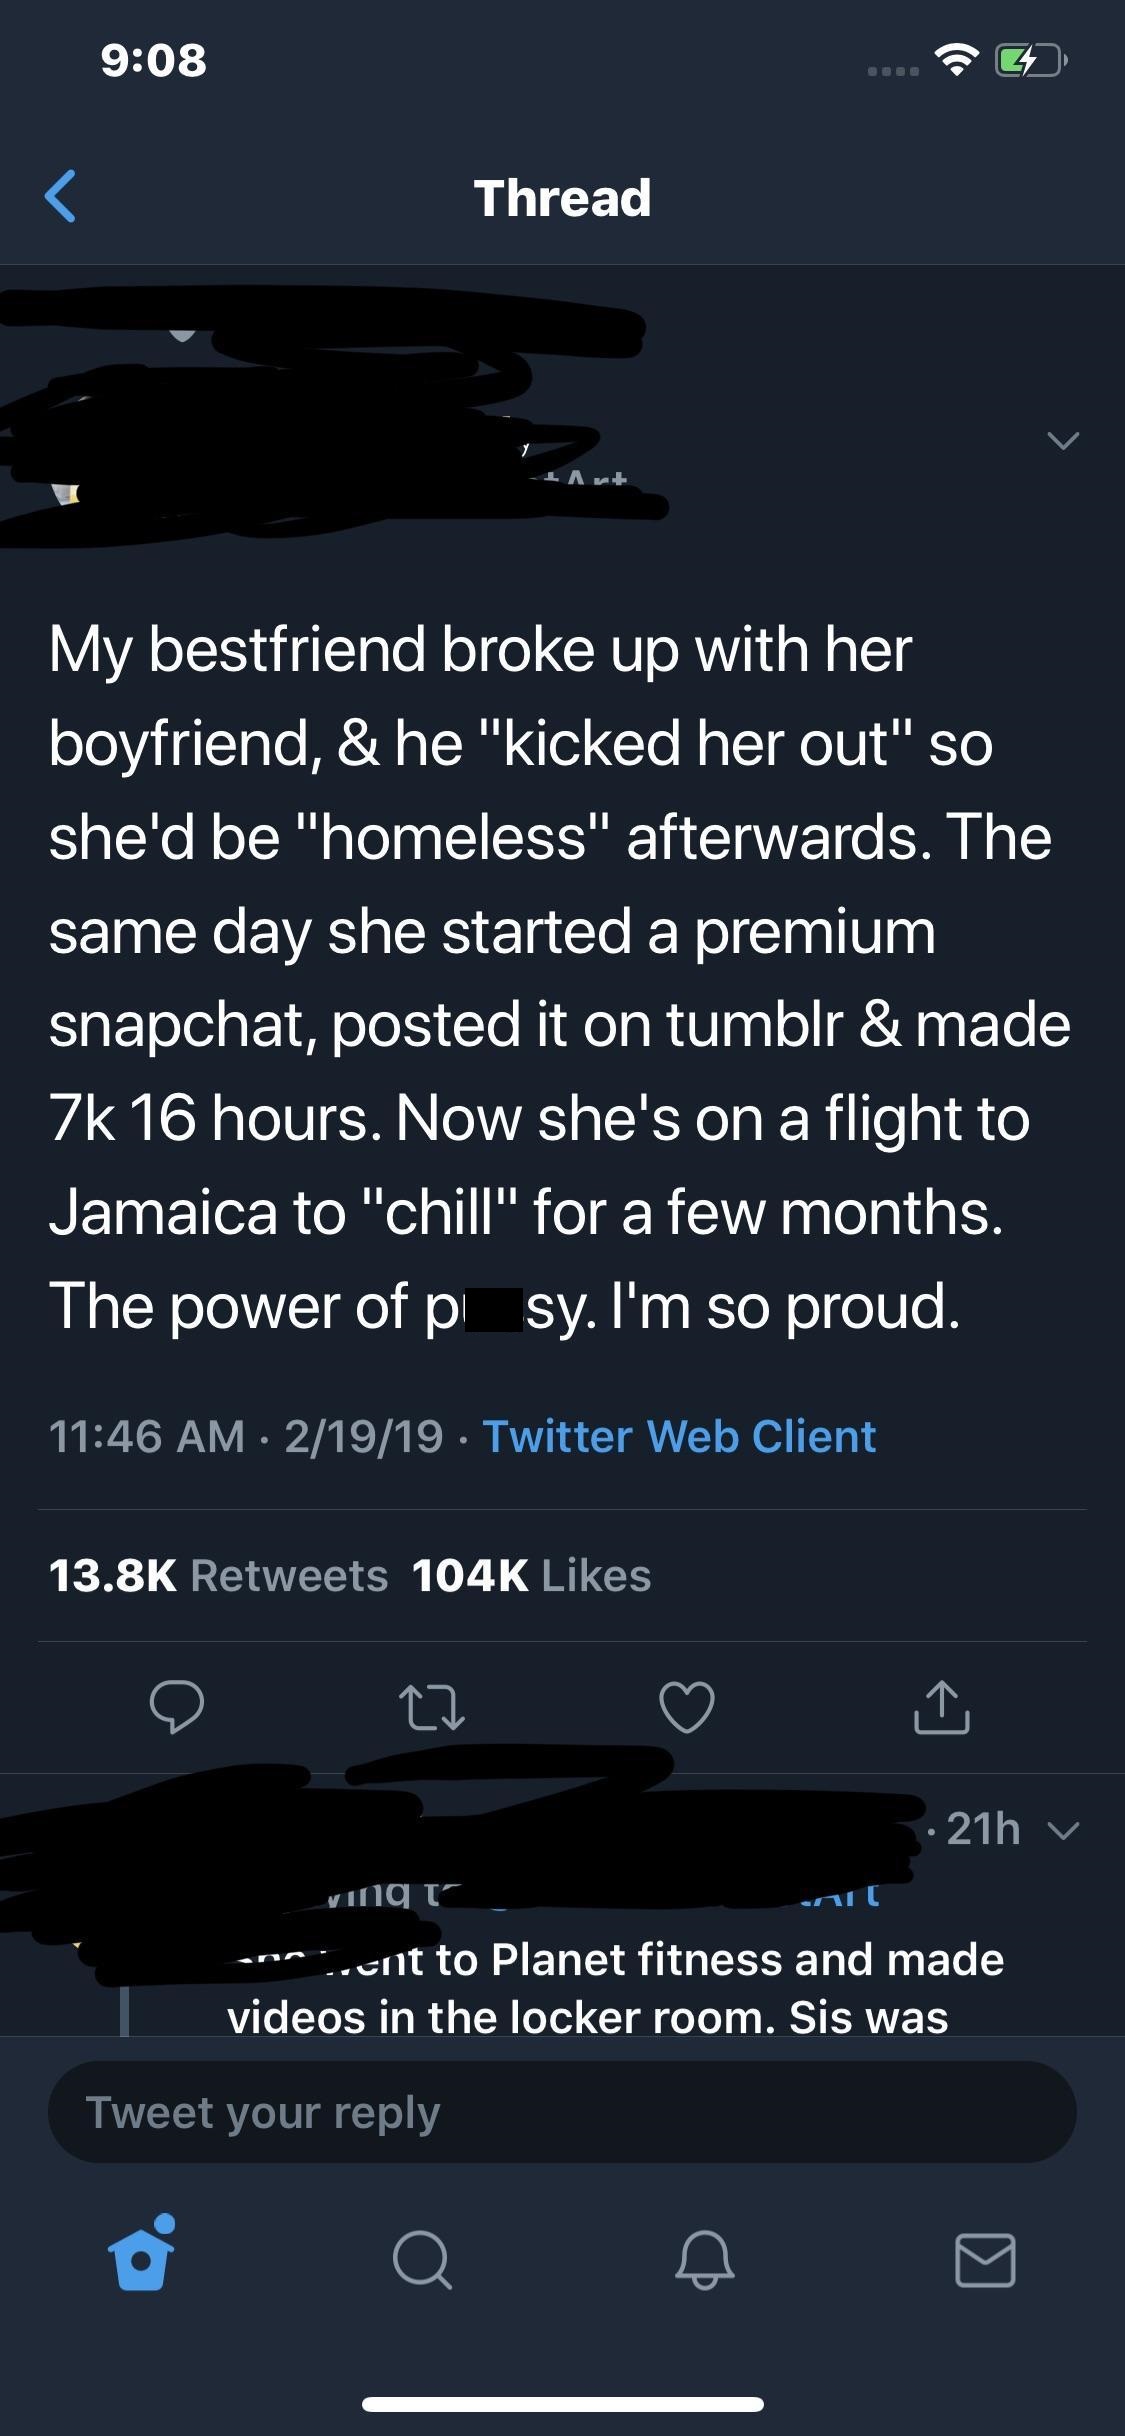 screenshot - Thread My bestfriend broke up with her boyfriend, & he "kicked her out" so she'd be "homeless" afterwards. The same day she started a premium snapchat, posted it on tumblr & made 7k 16 hours. Now she's on a flight to Jamaica to "chill" for a 